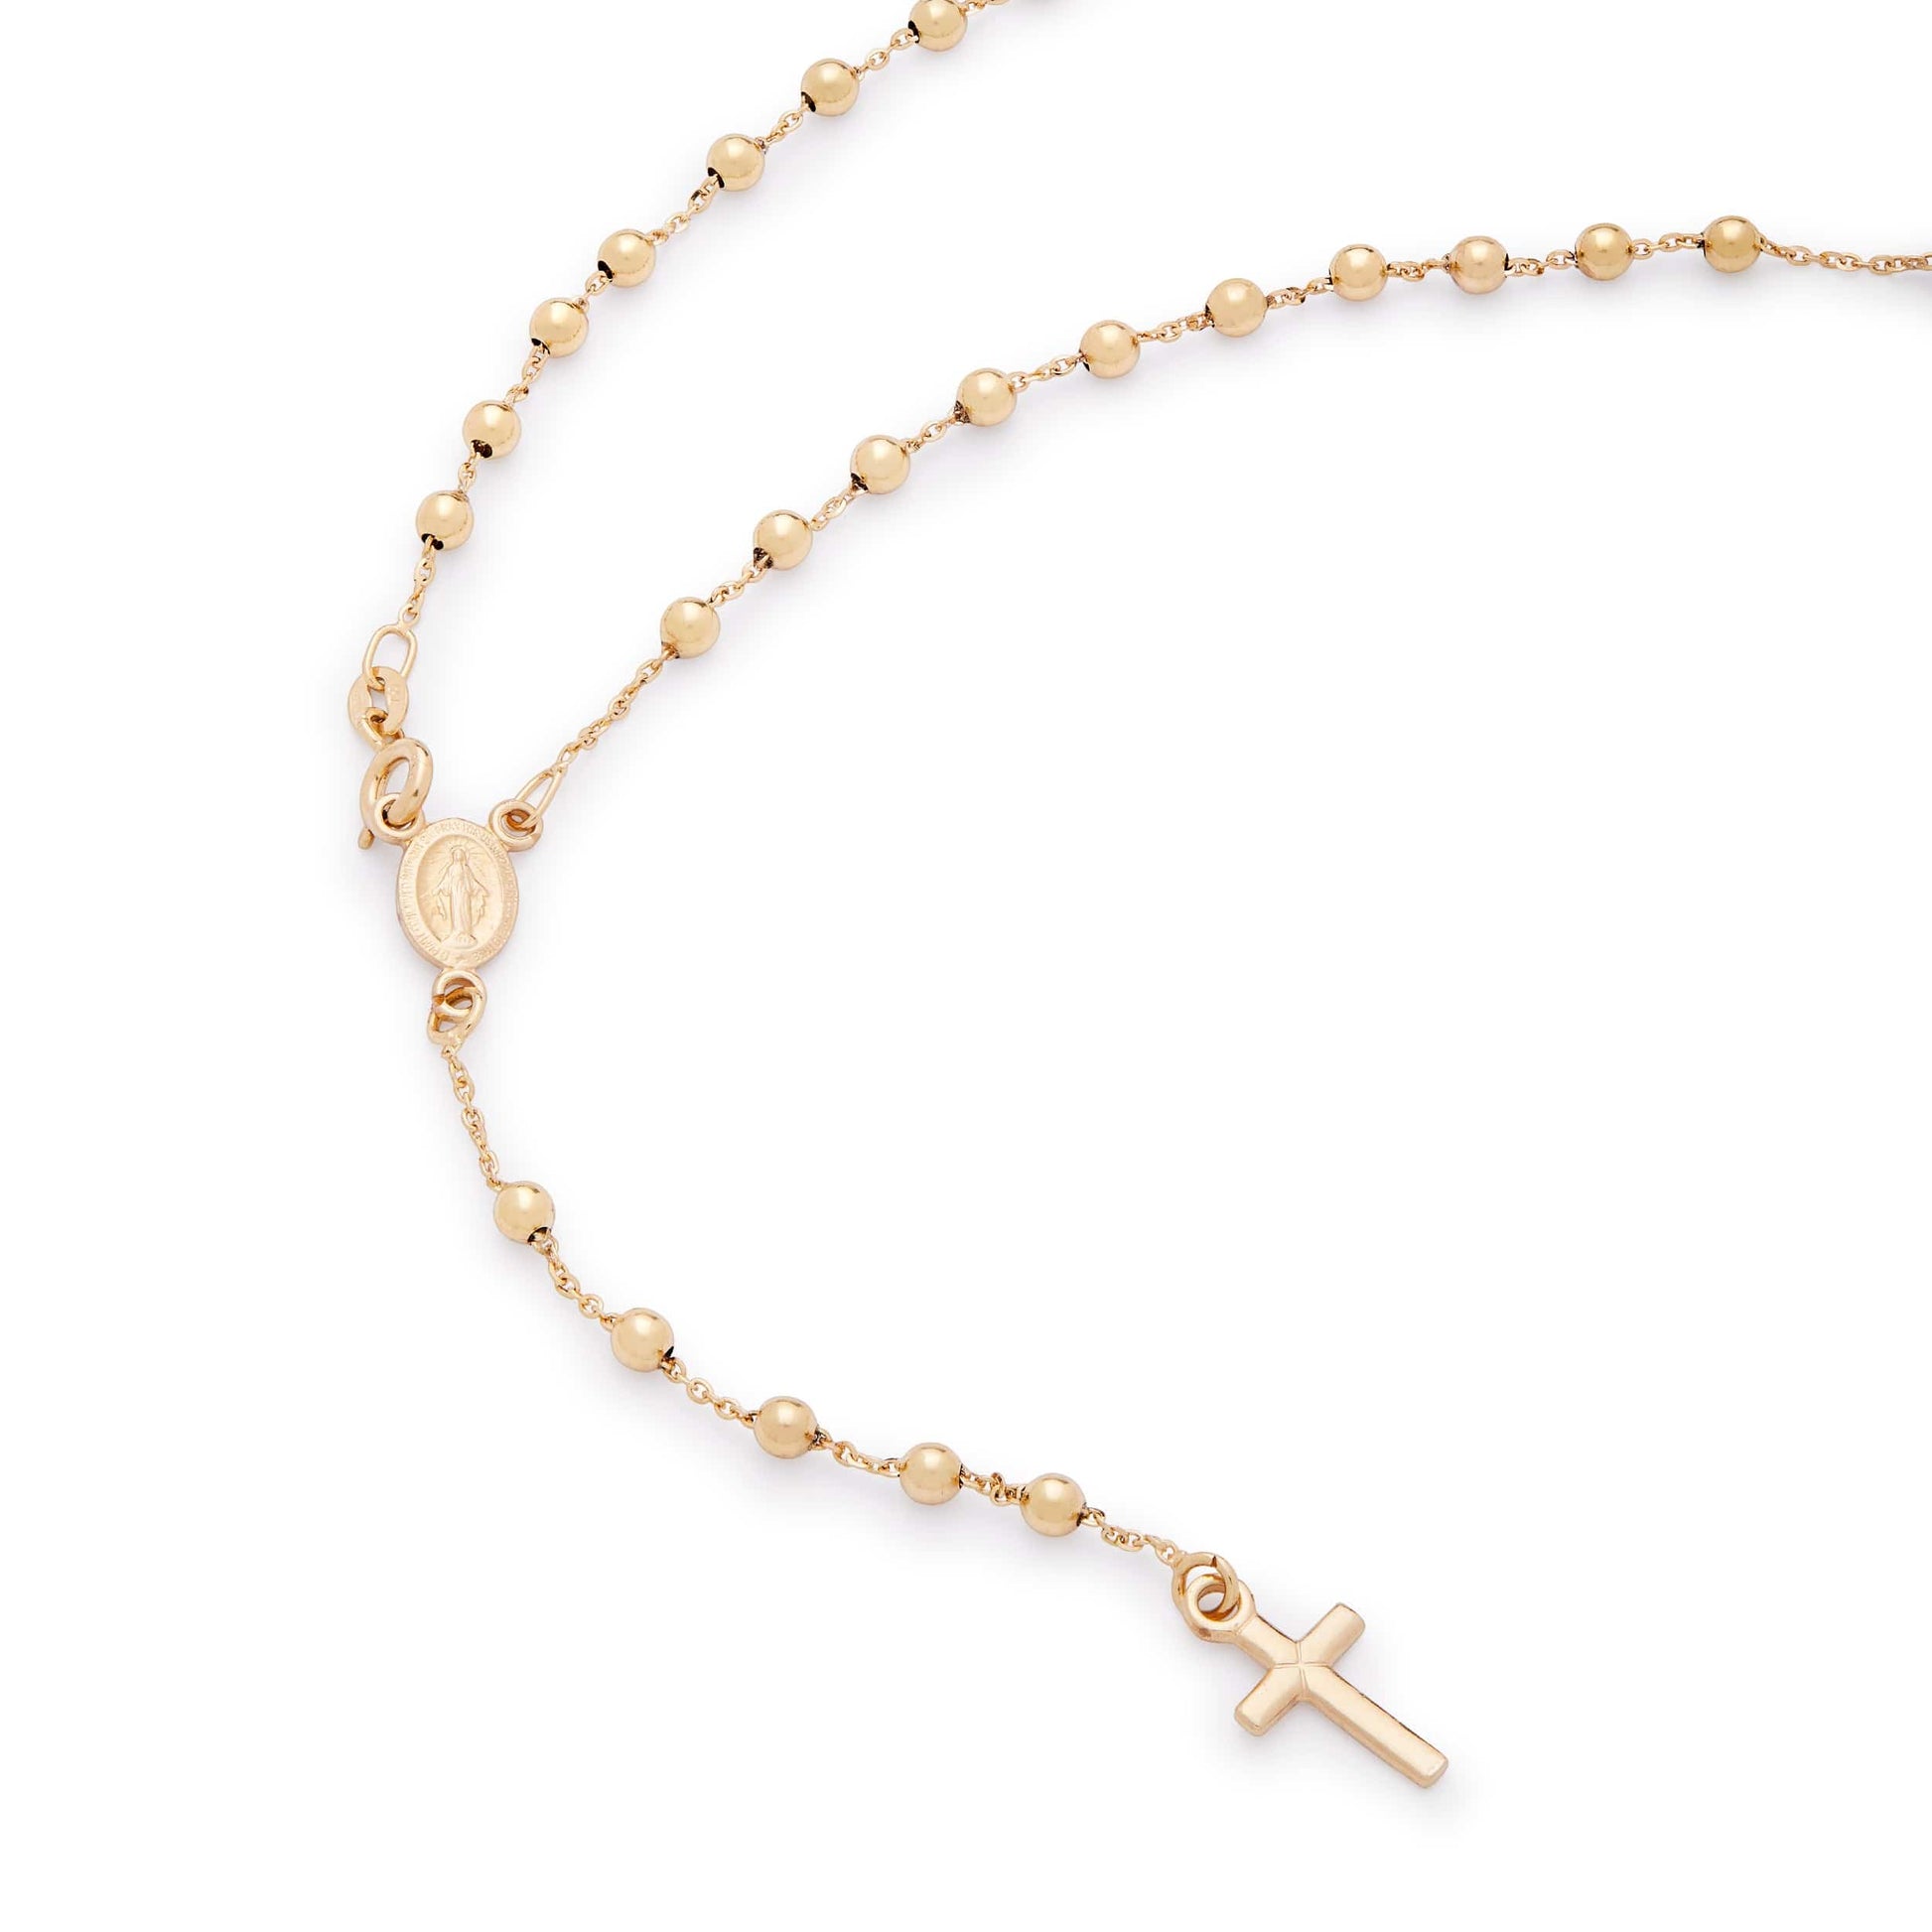 MONDO CATTOLICO Prayer Beads 30.5 cm (12 in) / 3 mm (0.11 in) Miraculous Mary Yellow Gold Rosary Beads